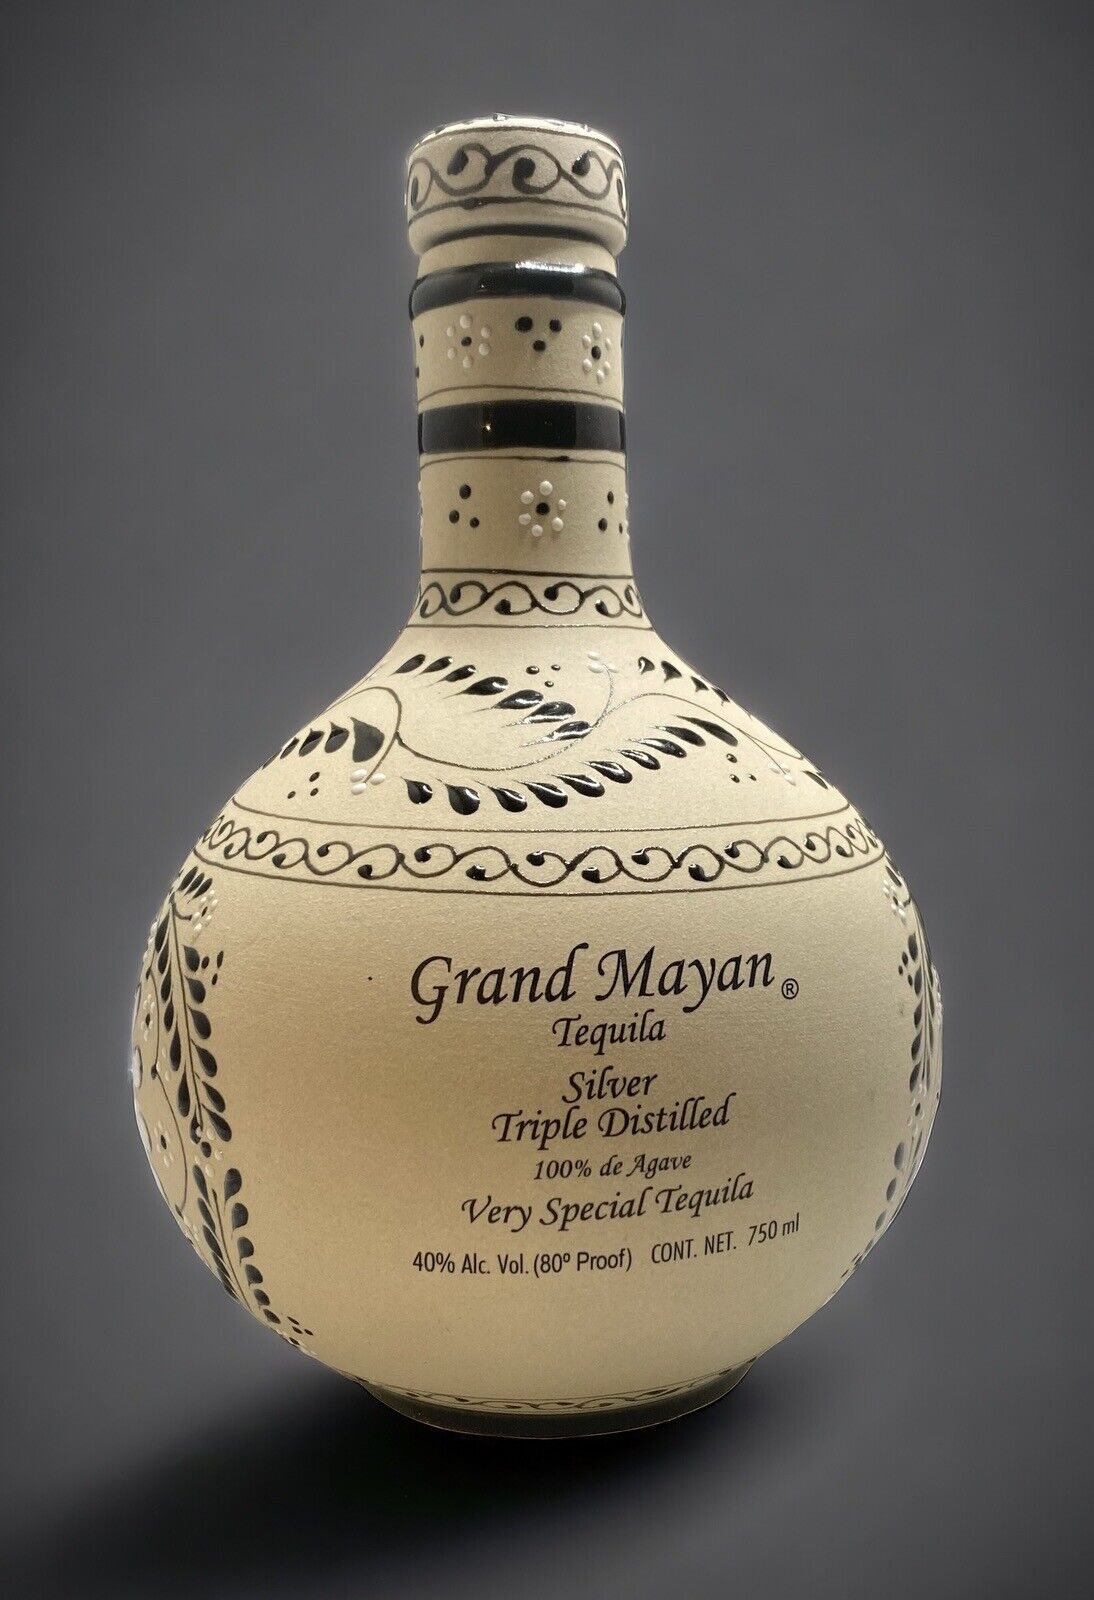 Grand Mayan Silver Tequila Empty Clay Liquor Bottle 750ml Mexican Collectors